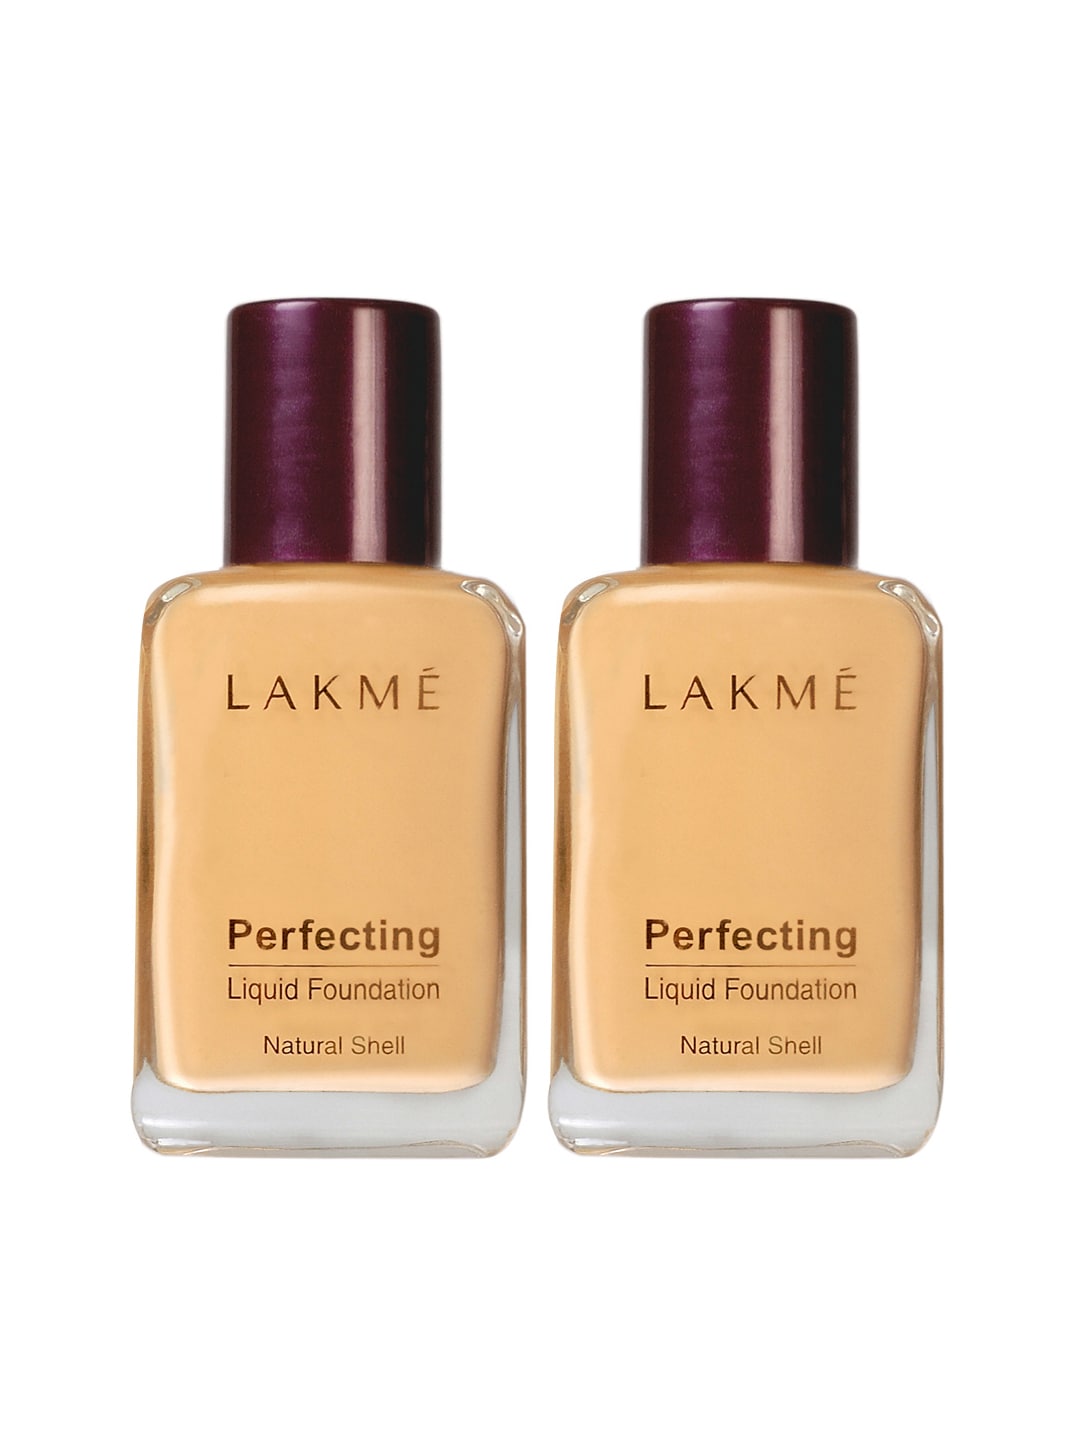 Lakme Set of 2 Perfecting Natural Shell Liquid Foundation Price in India